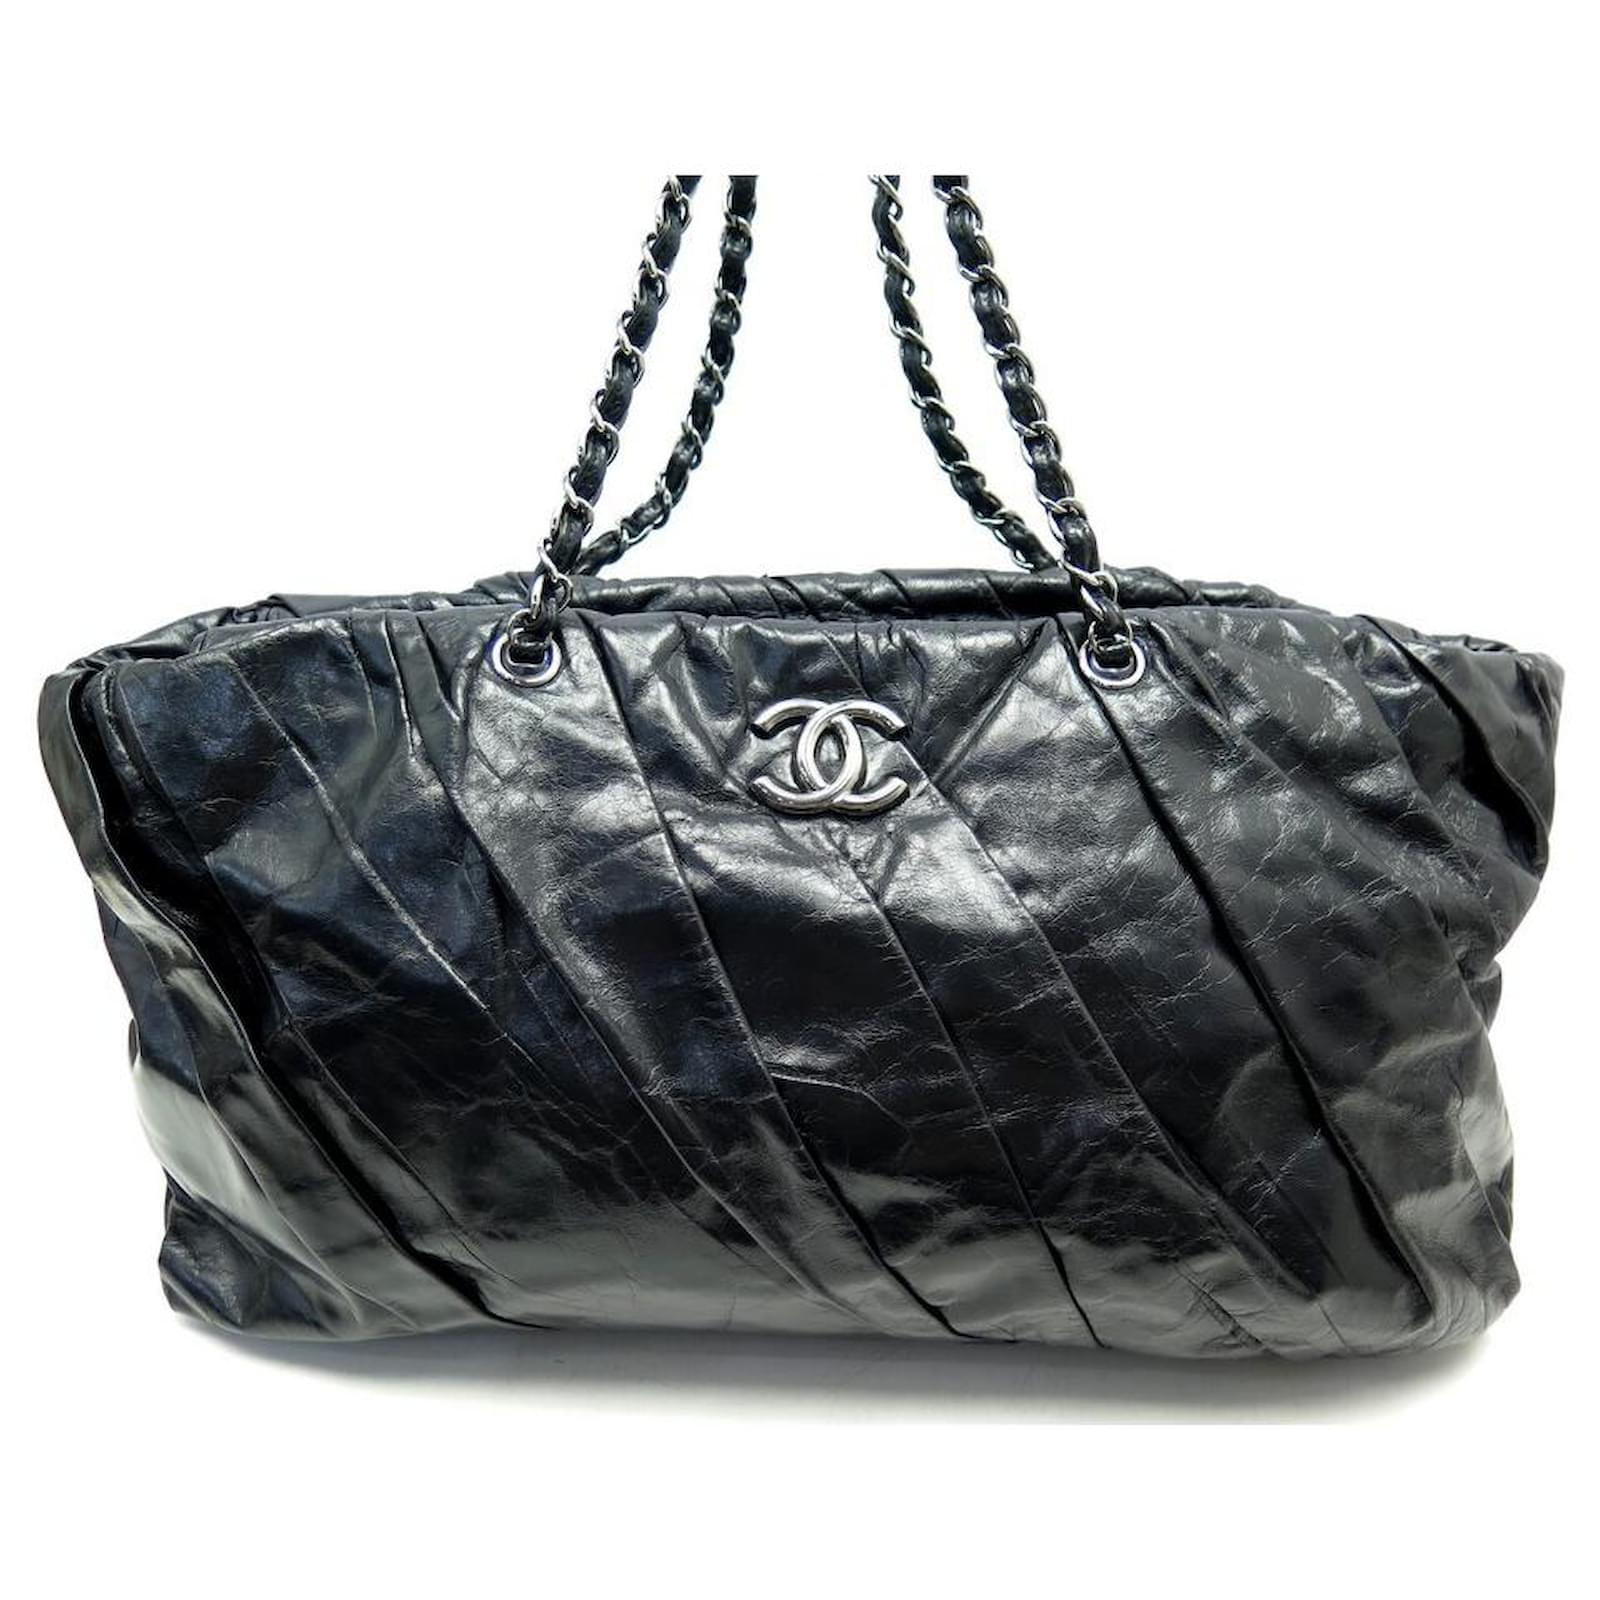 TRAVEL HANDBAGS CHANEL SHOPPING BAG BLACK PLEATED LEATHER WEEKEND